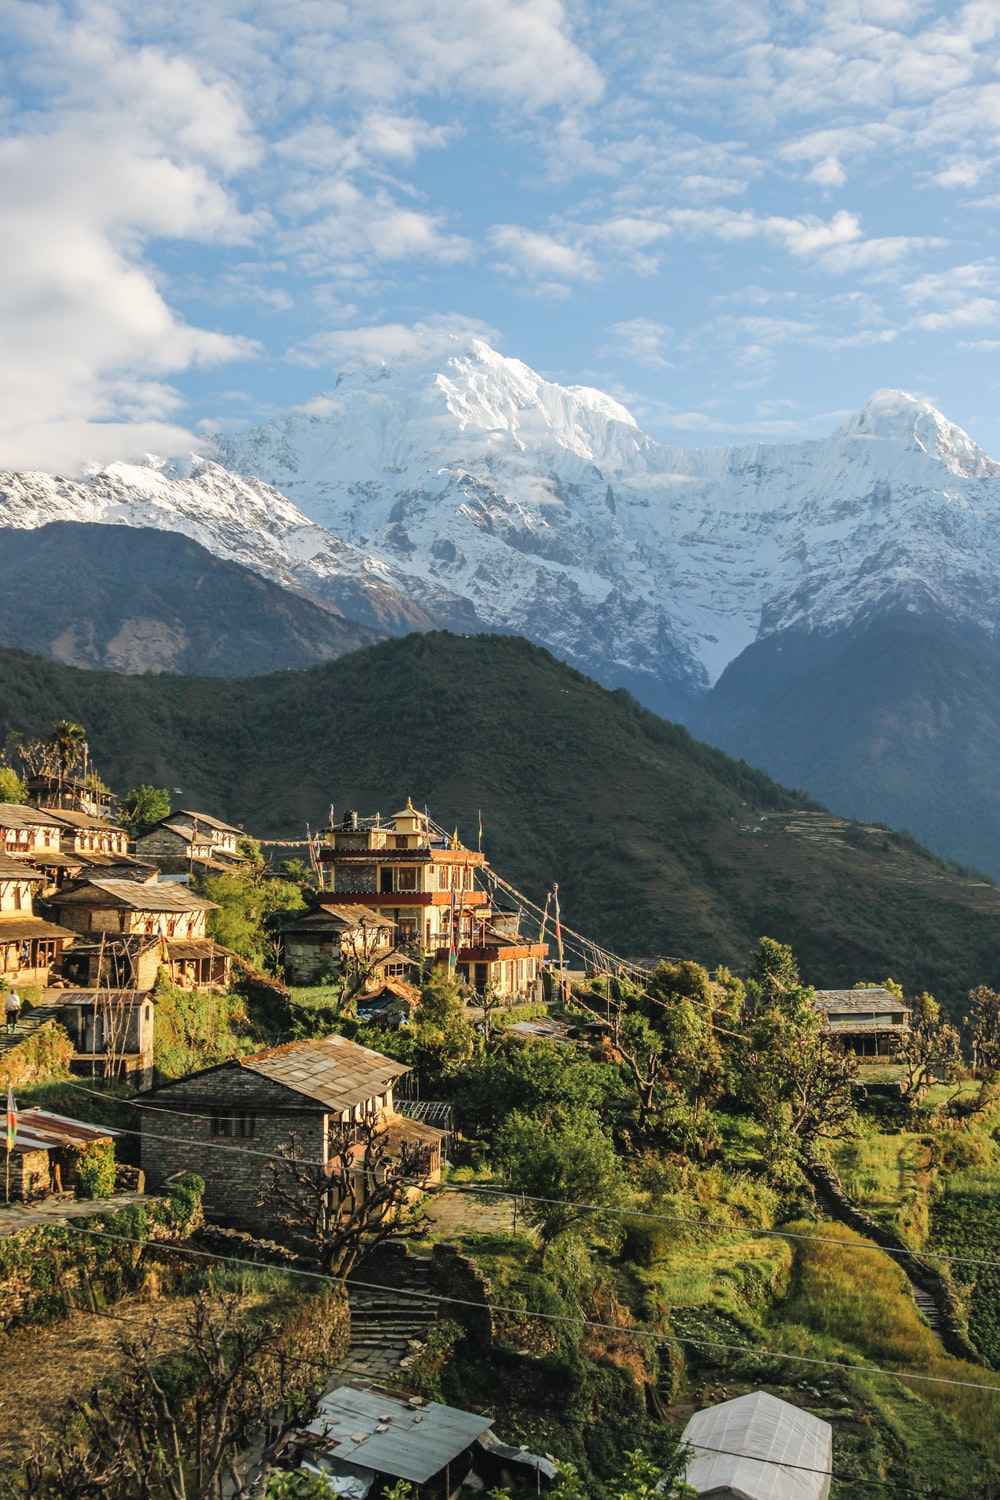 Beautiful Nepal Picture. Download Free Image